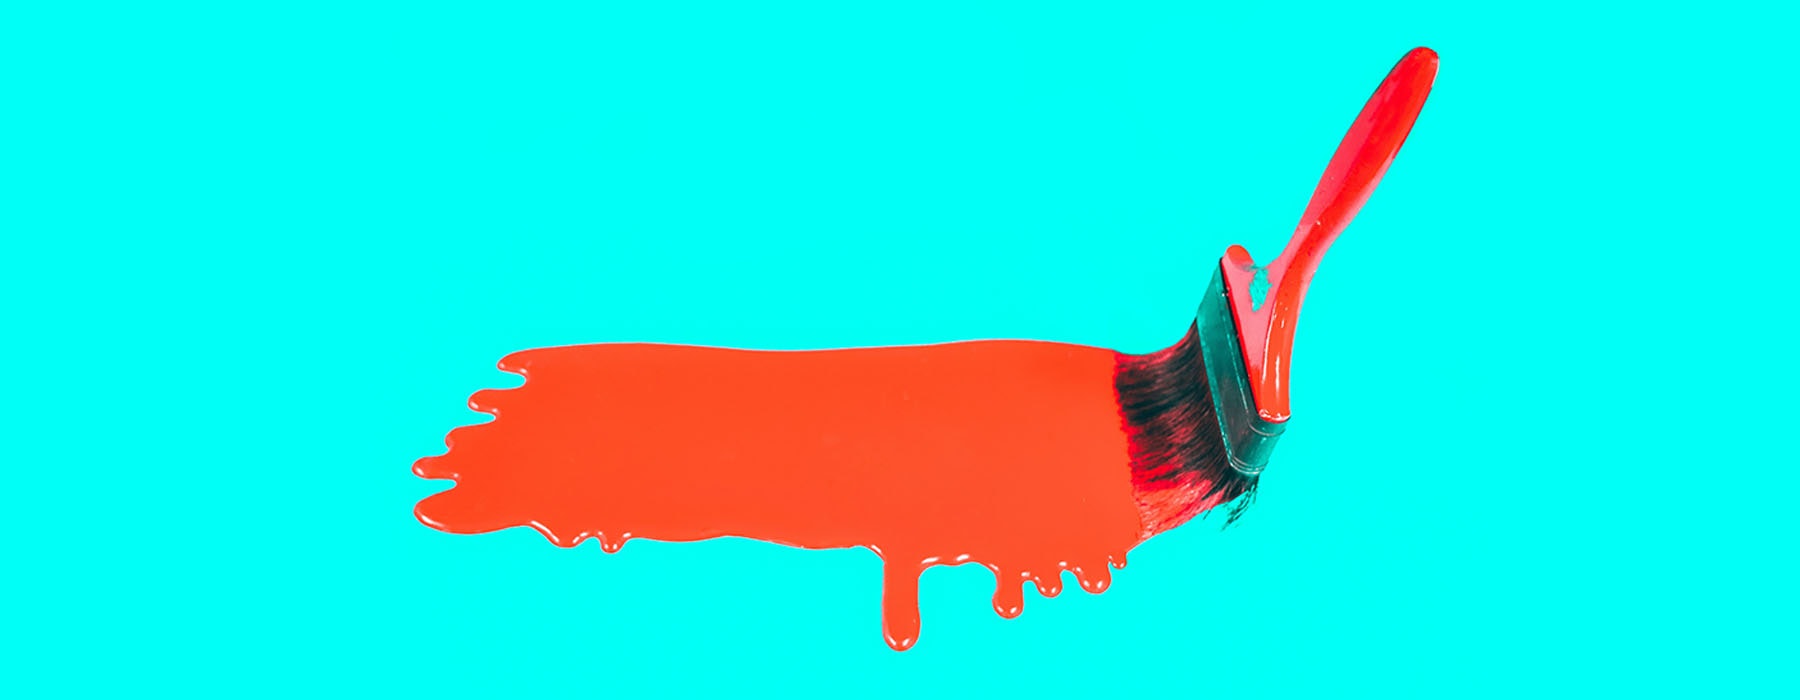 Paintbrush with red paint